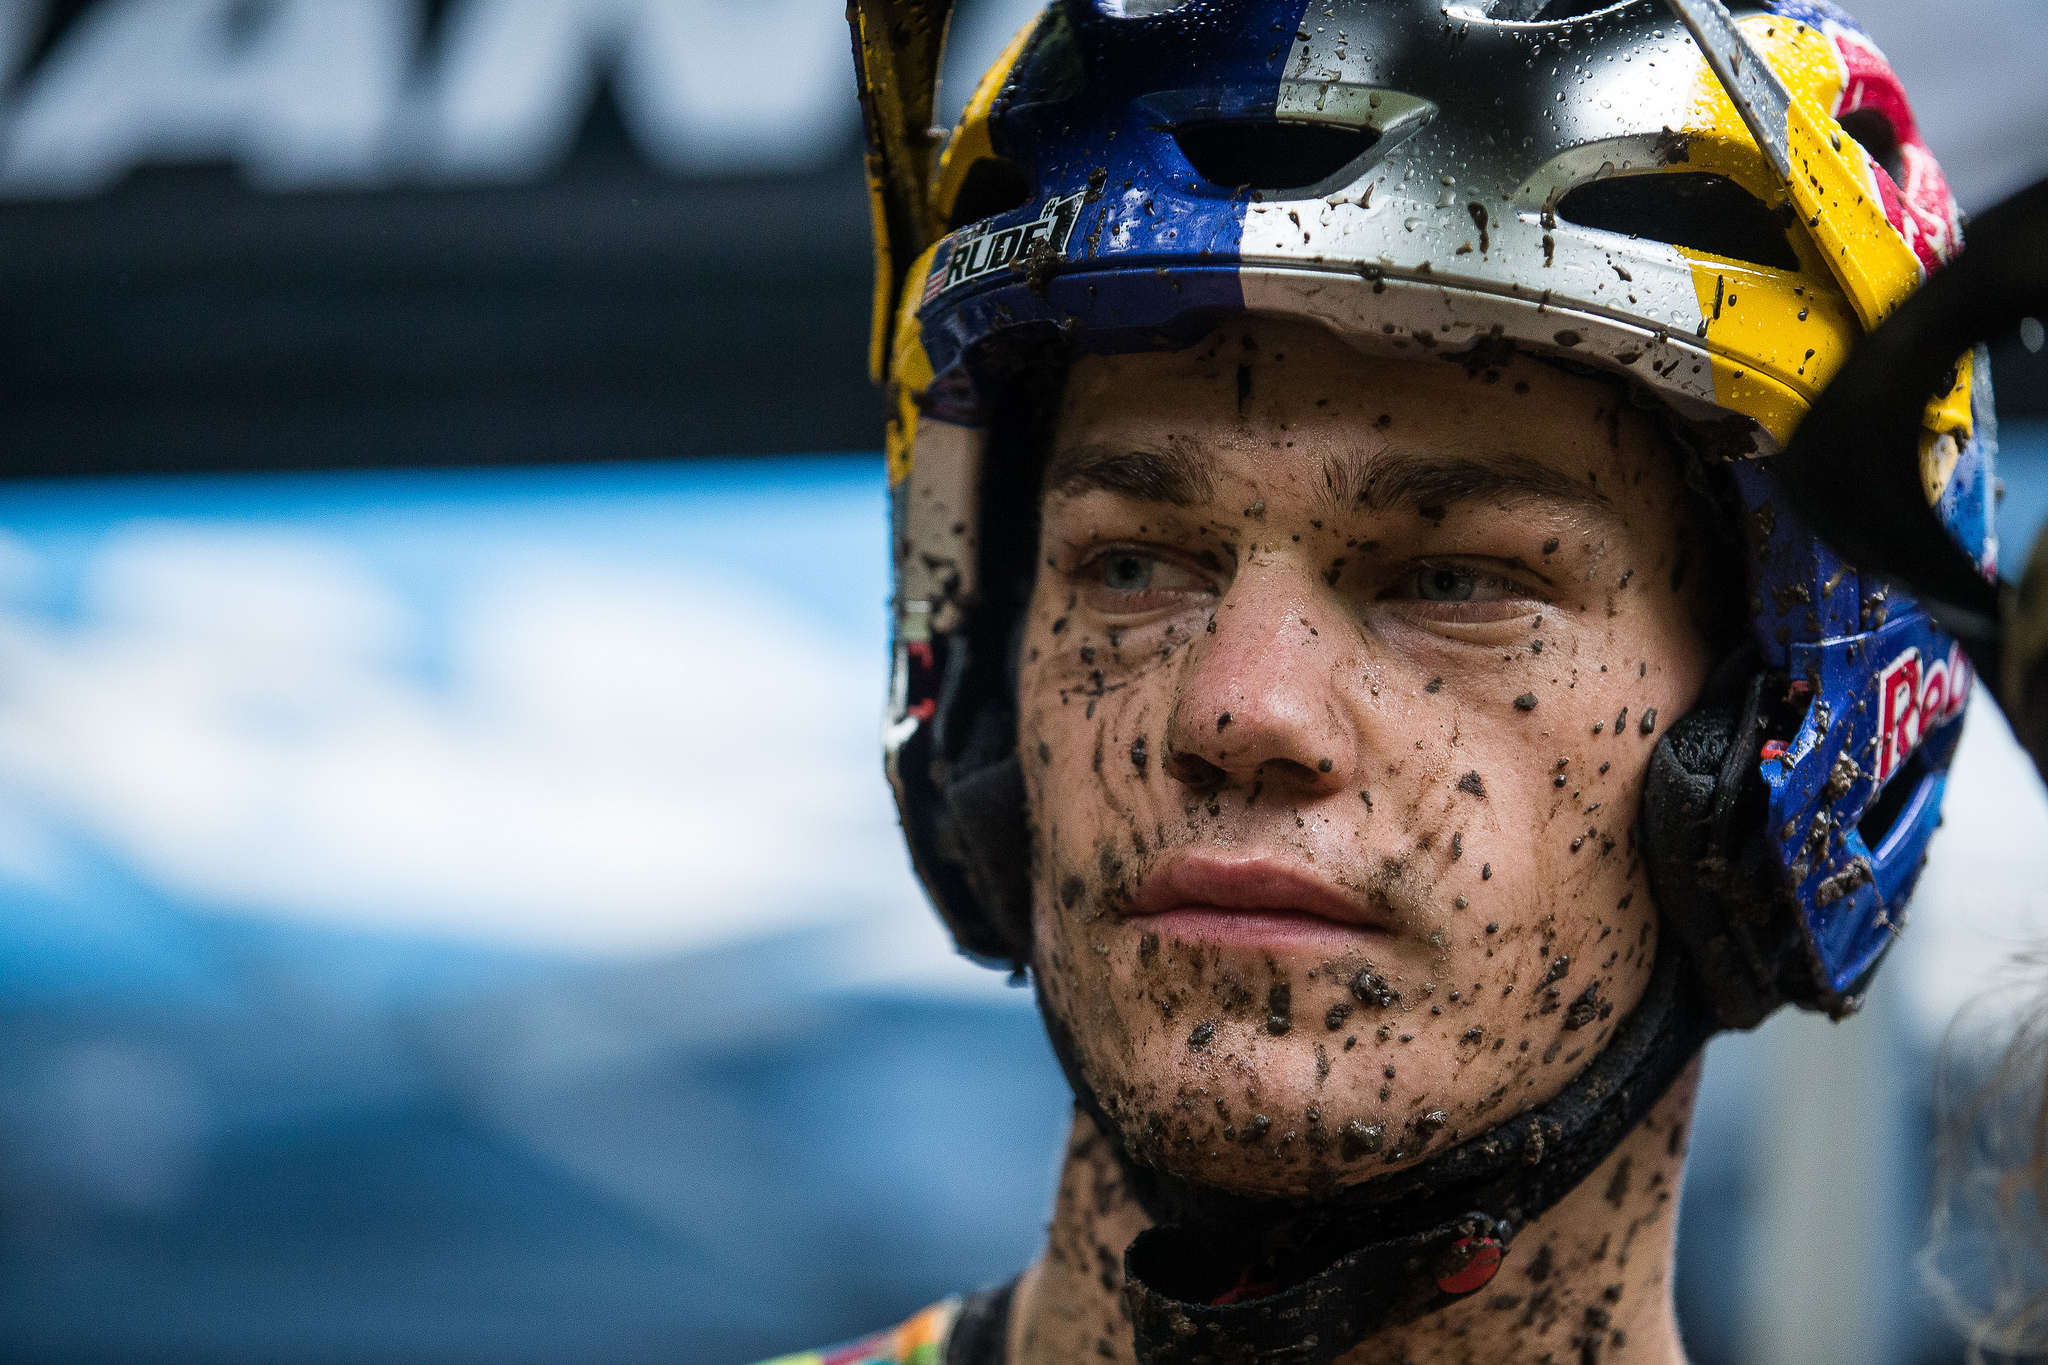 Richie Rude would have been the last man on course today and suffered the worst of conditions